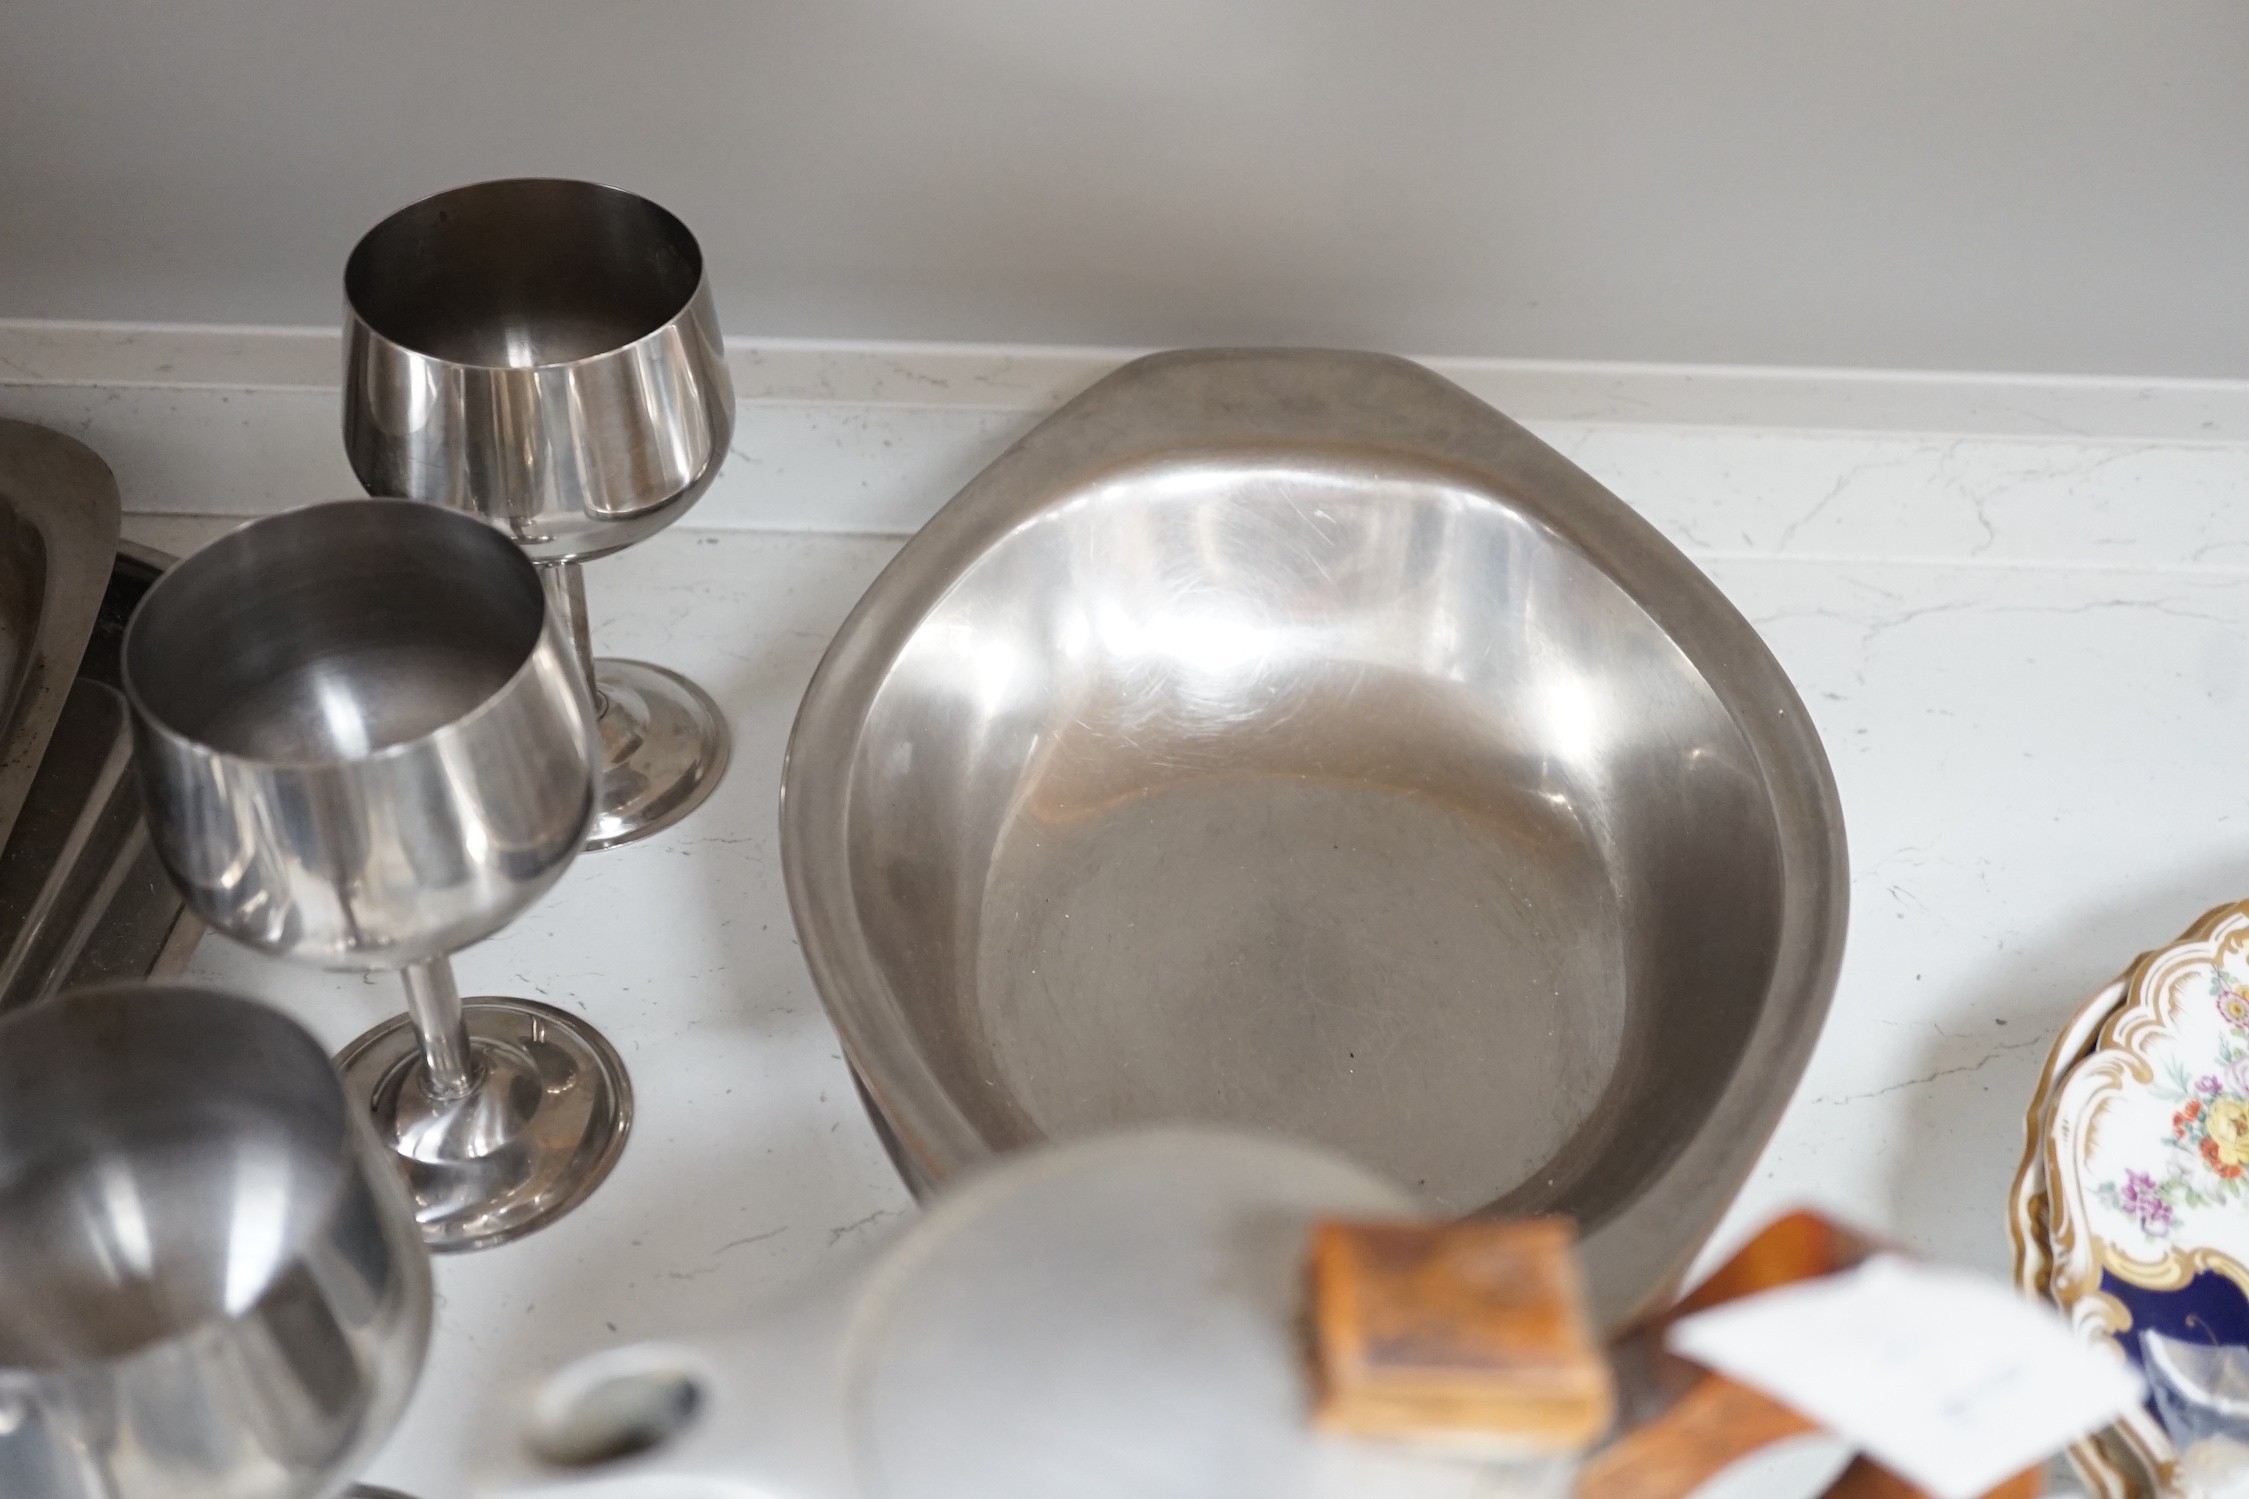 Various 1960's stainless steel wares including Danish and Piqcuot ware